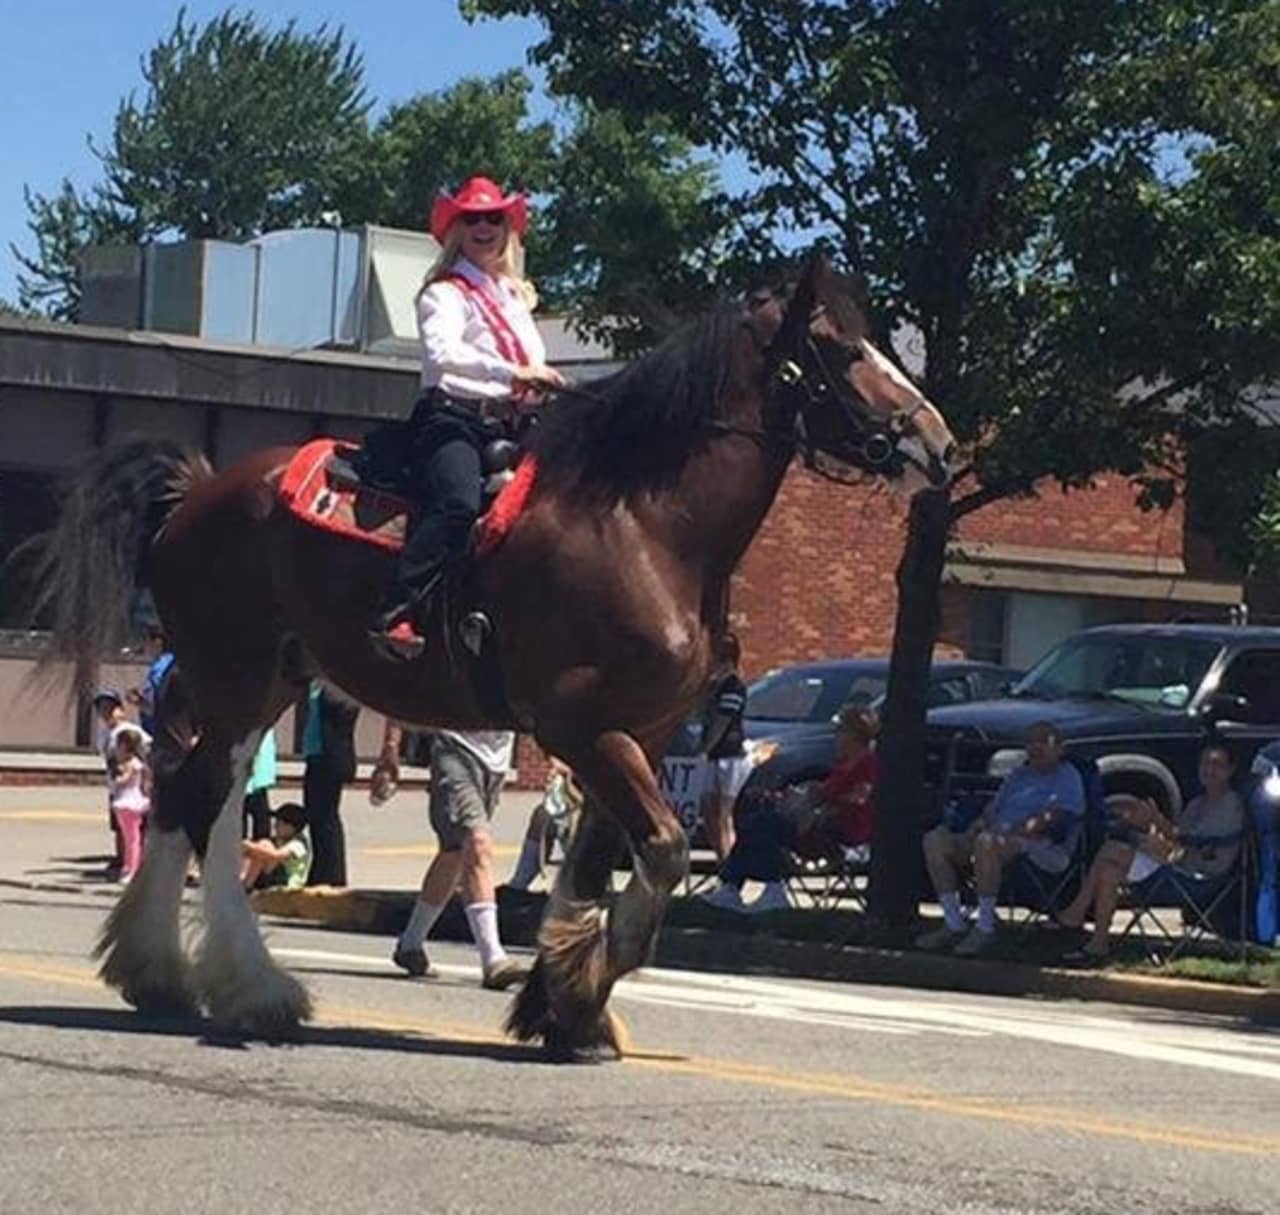 Stuntwoman and Elmwood Park native Diane Peterson rides a horse in the borough's Centennial Parade on Sunday.